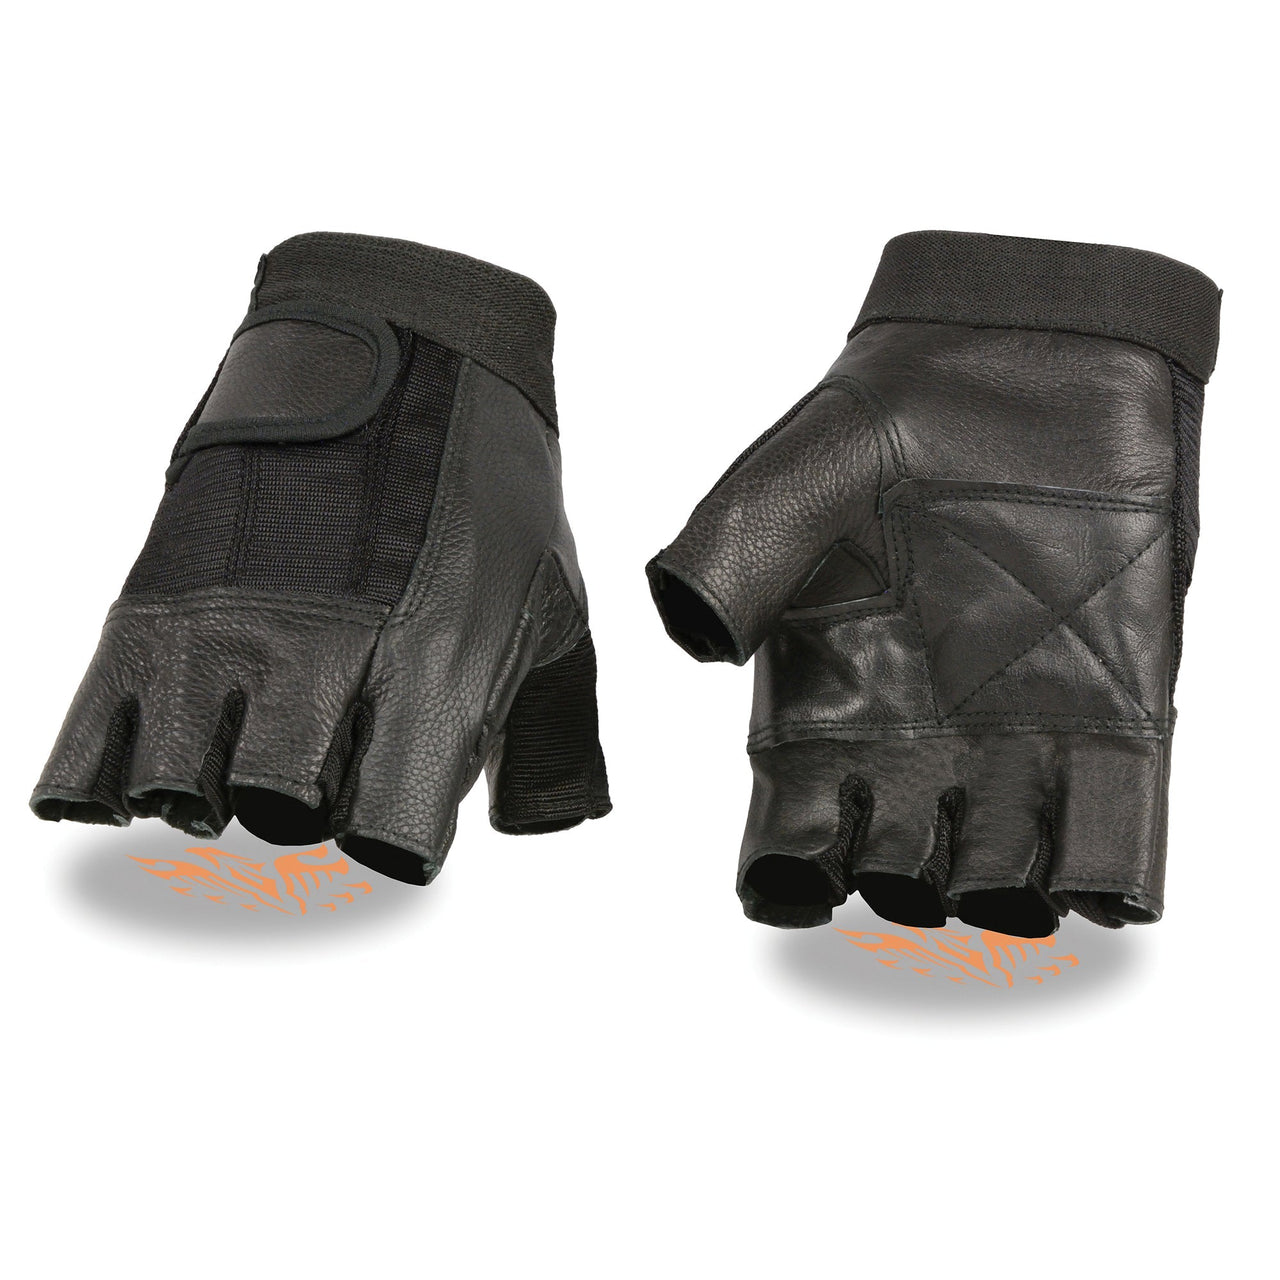 Men's Leather & Mesh Fingerless Glove w/ Padded Palm - HighwayLeather